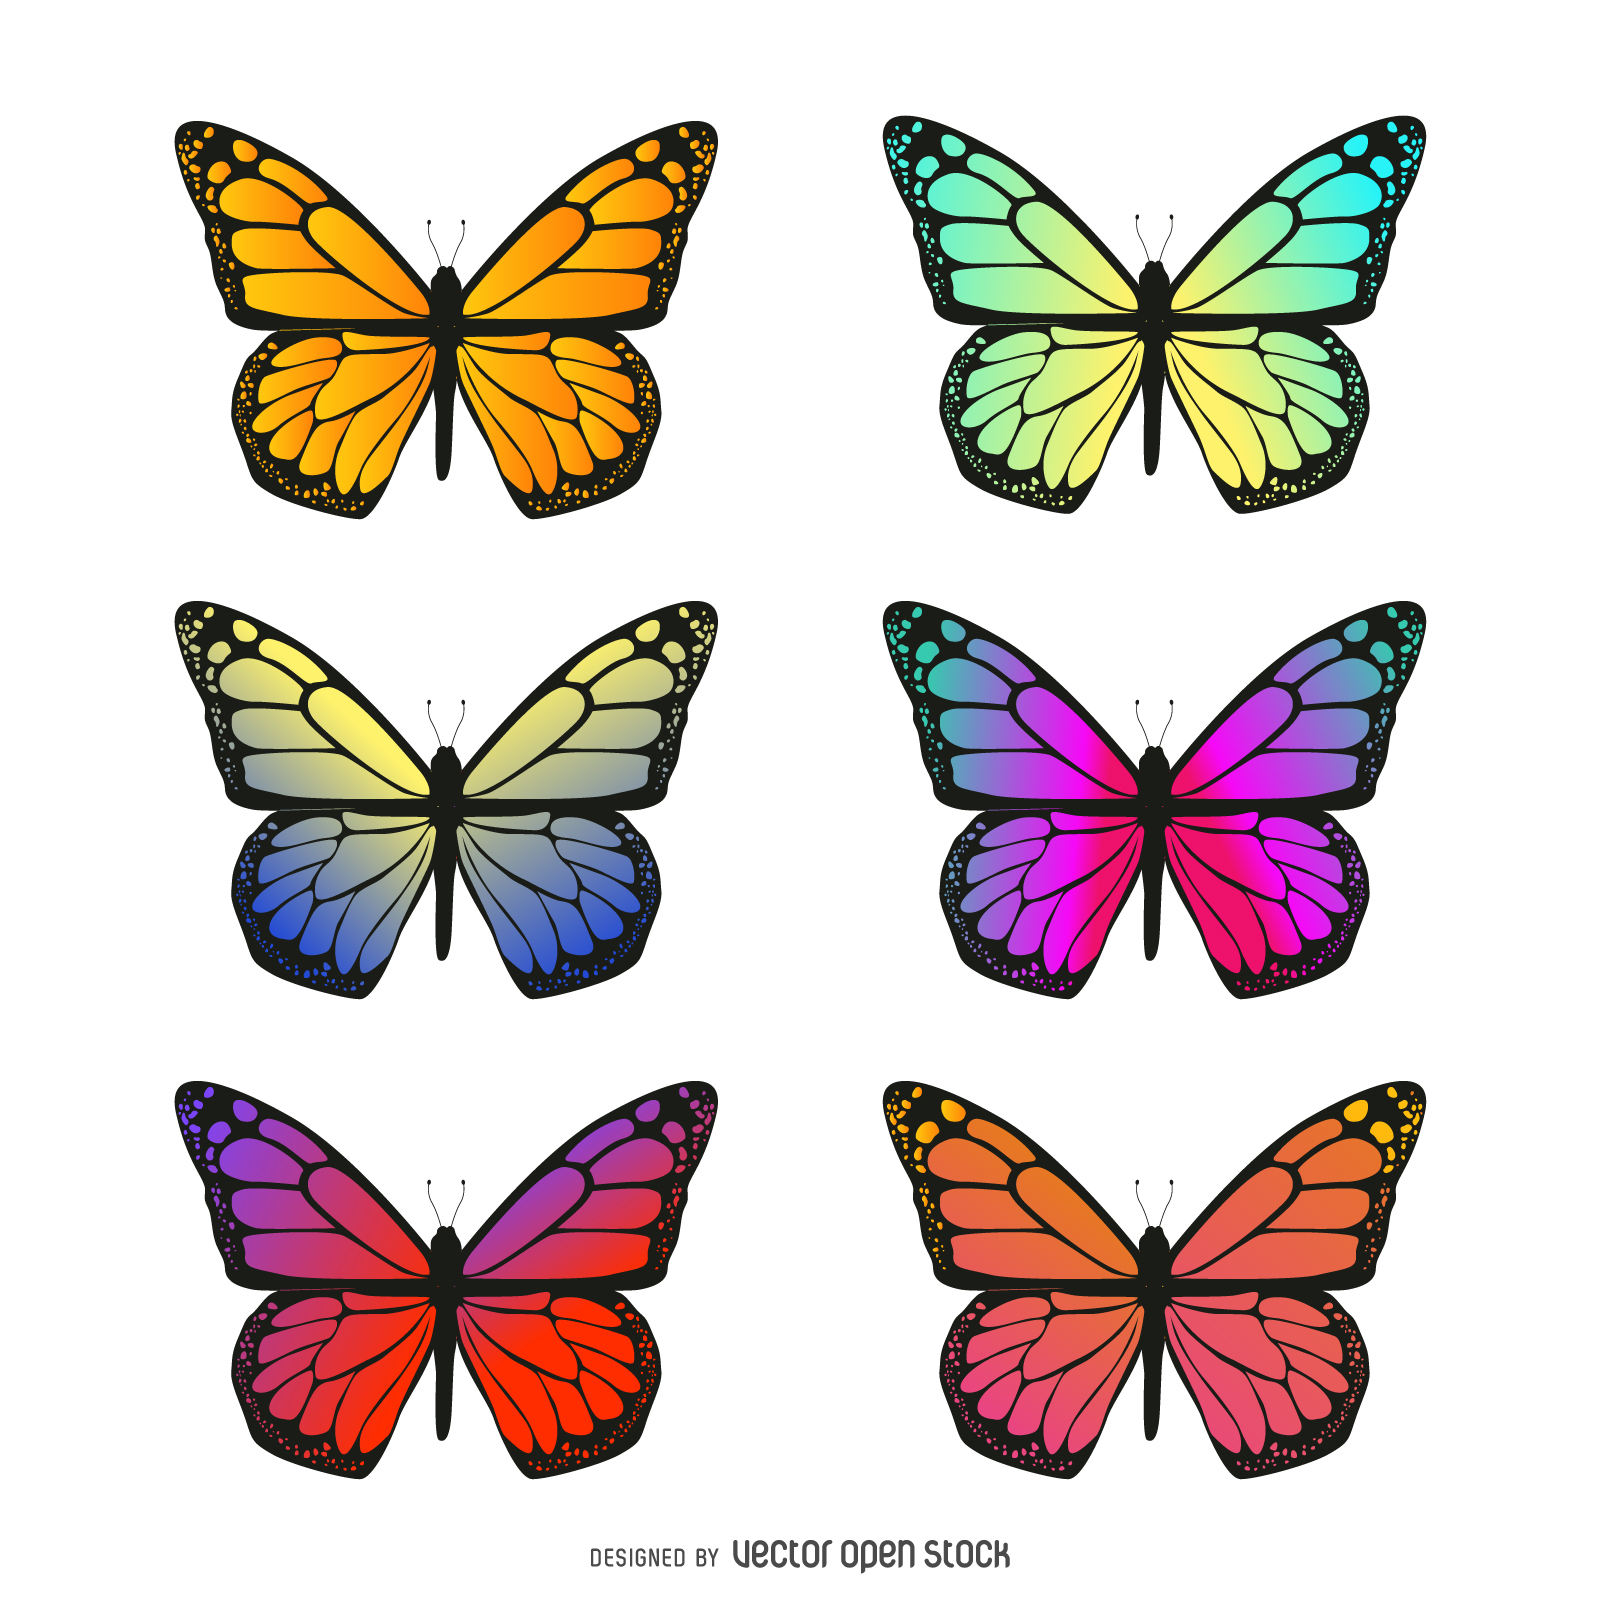 Isolated butterfly gradient illustration set - Vector download